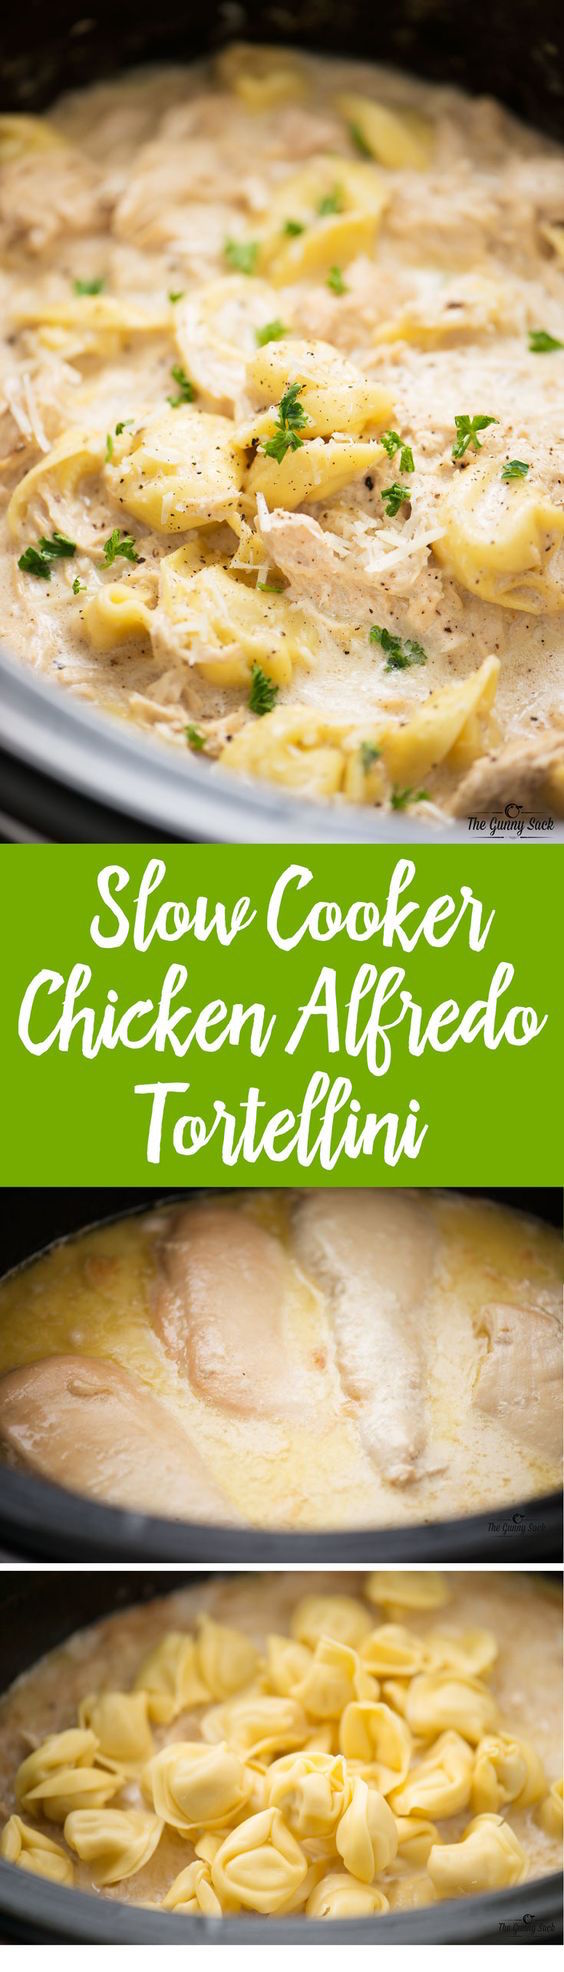 Slow Cooker Chicken Alfredo Tortellini is warm and comforting on a cold winter night. This easy, cheesy dinner recipe is a family favorite!